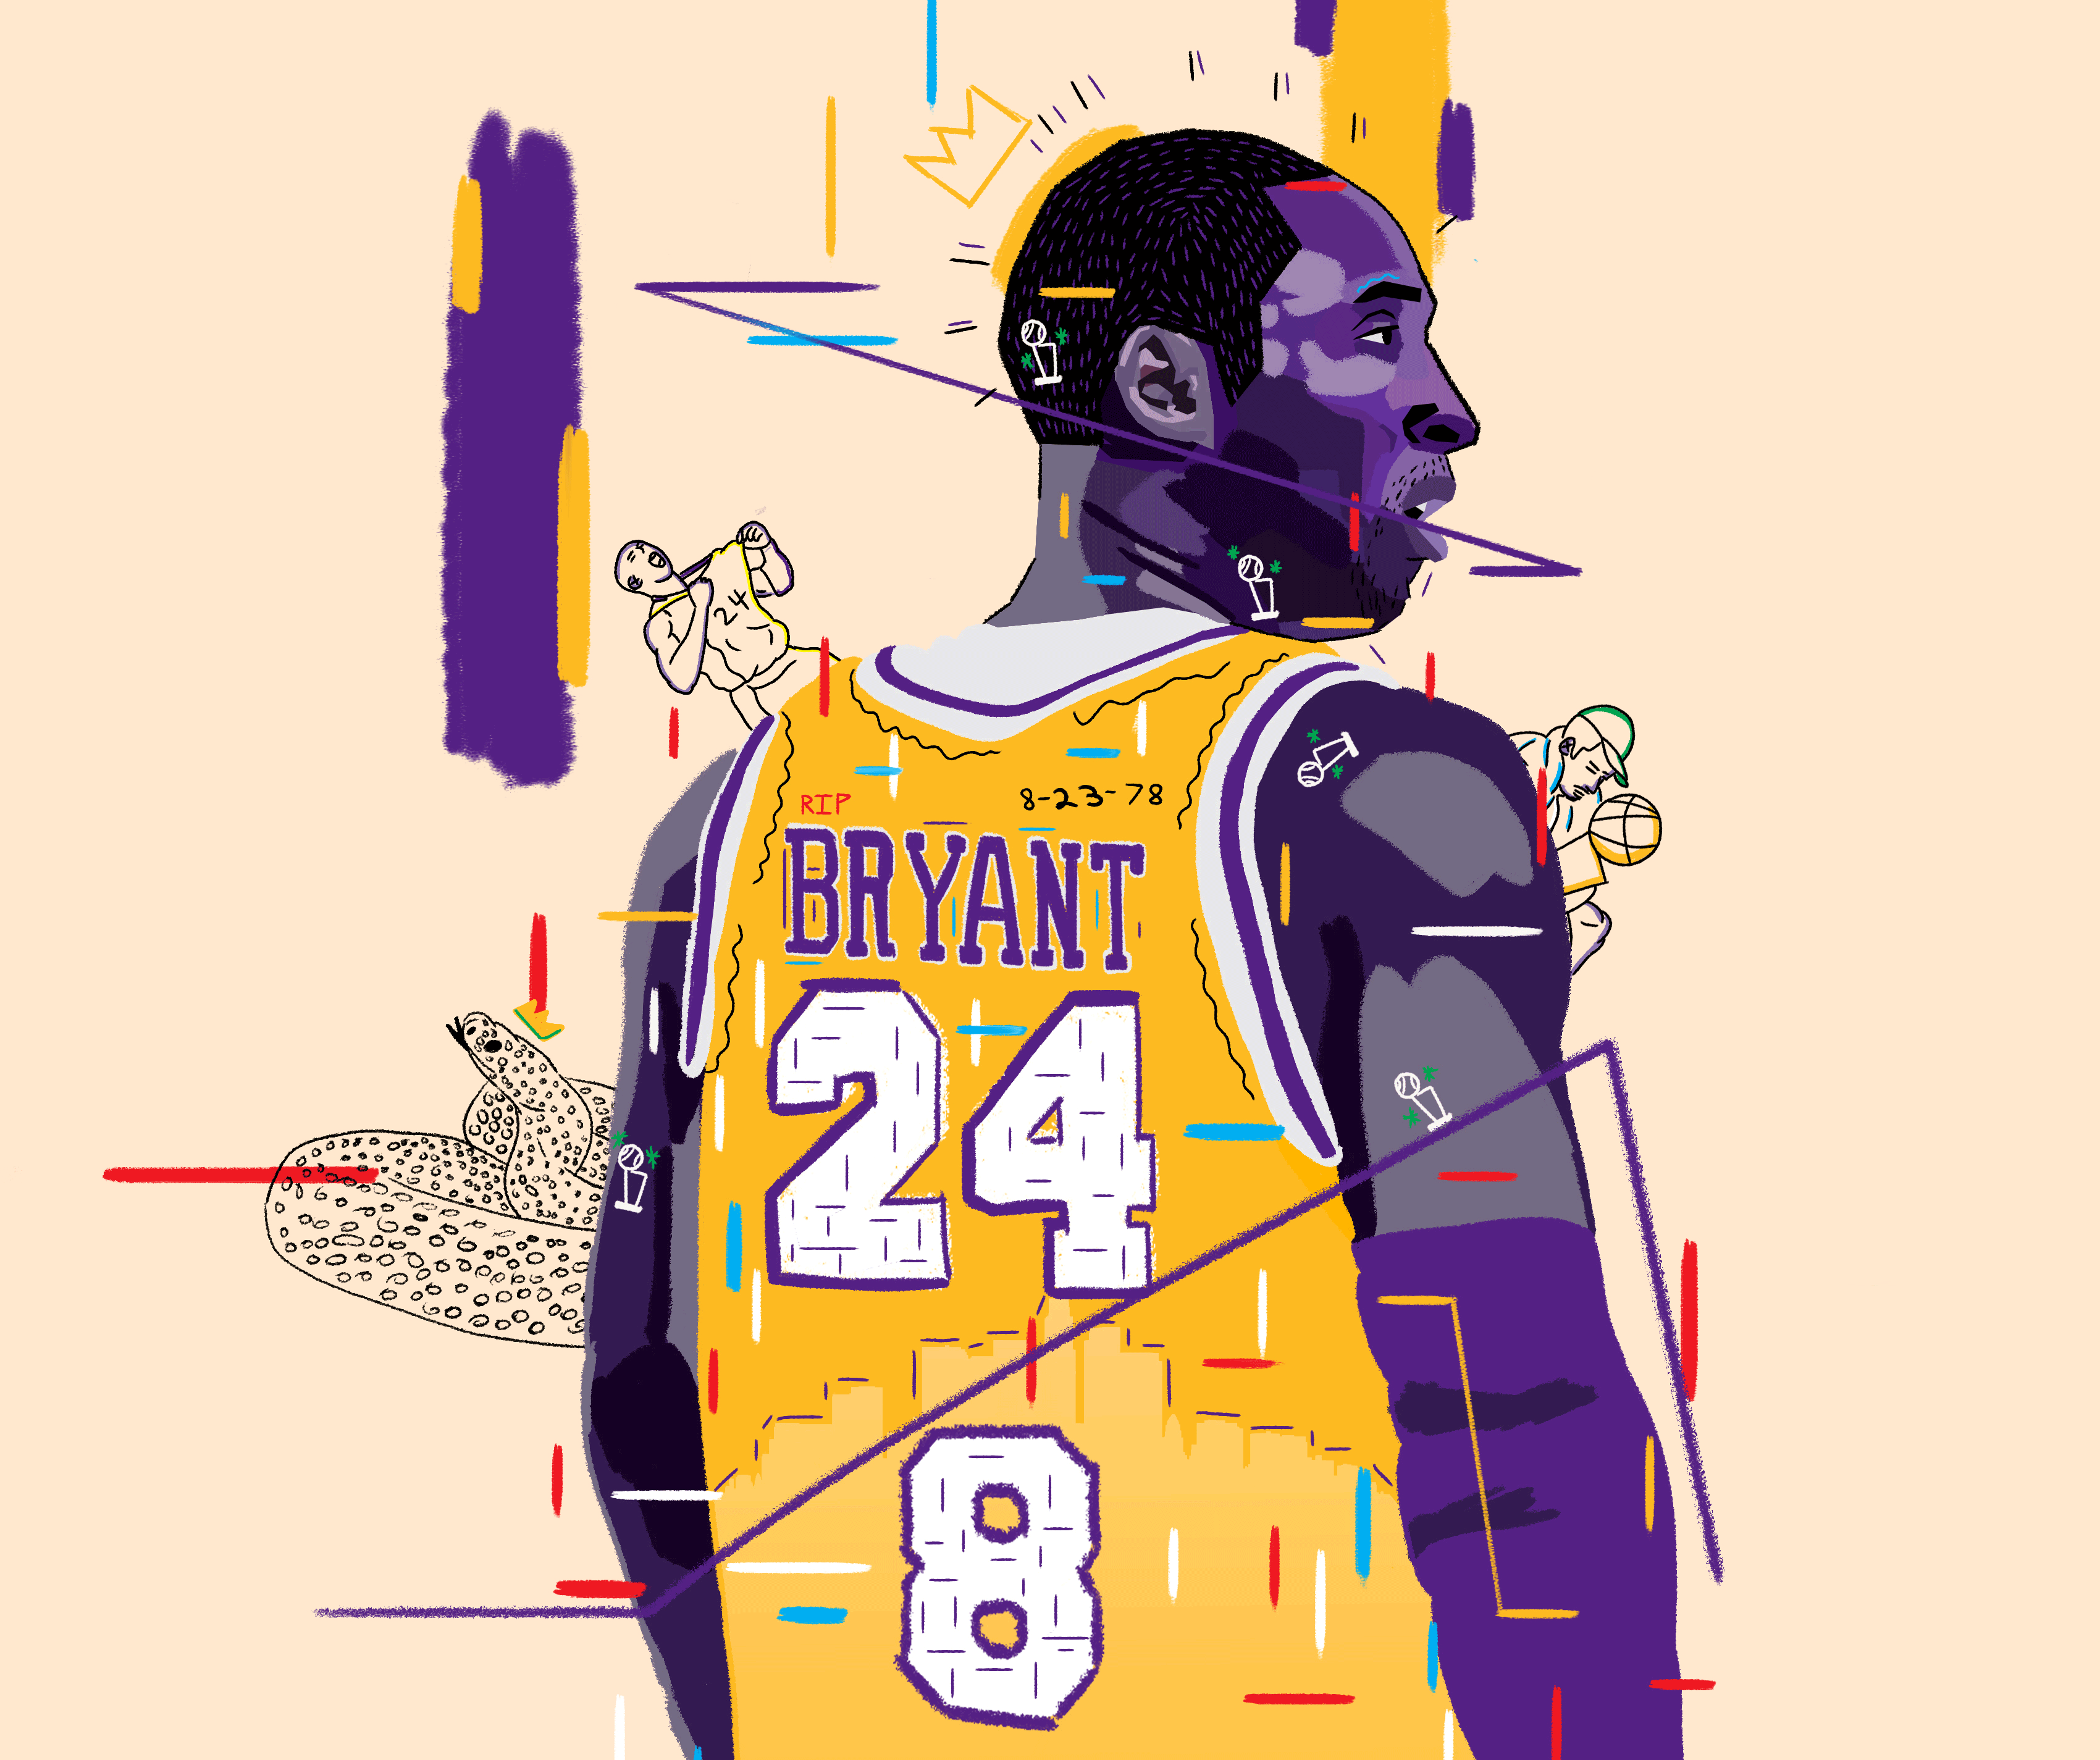 An illustration of Kobe Bryant wearing a Lakers jersey with his last name and the No. 24 and No. 8 on the back of it.